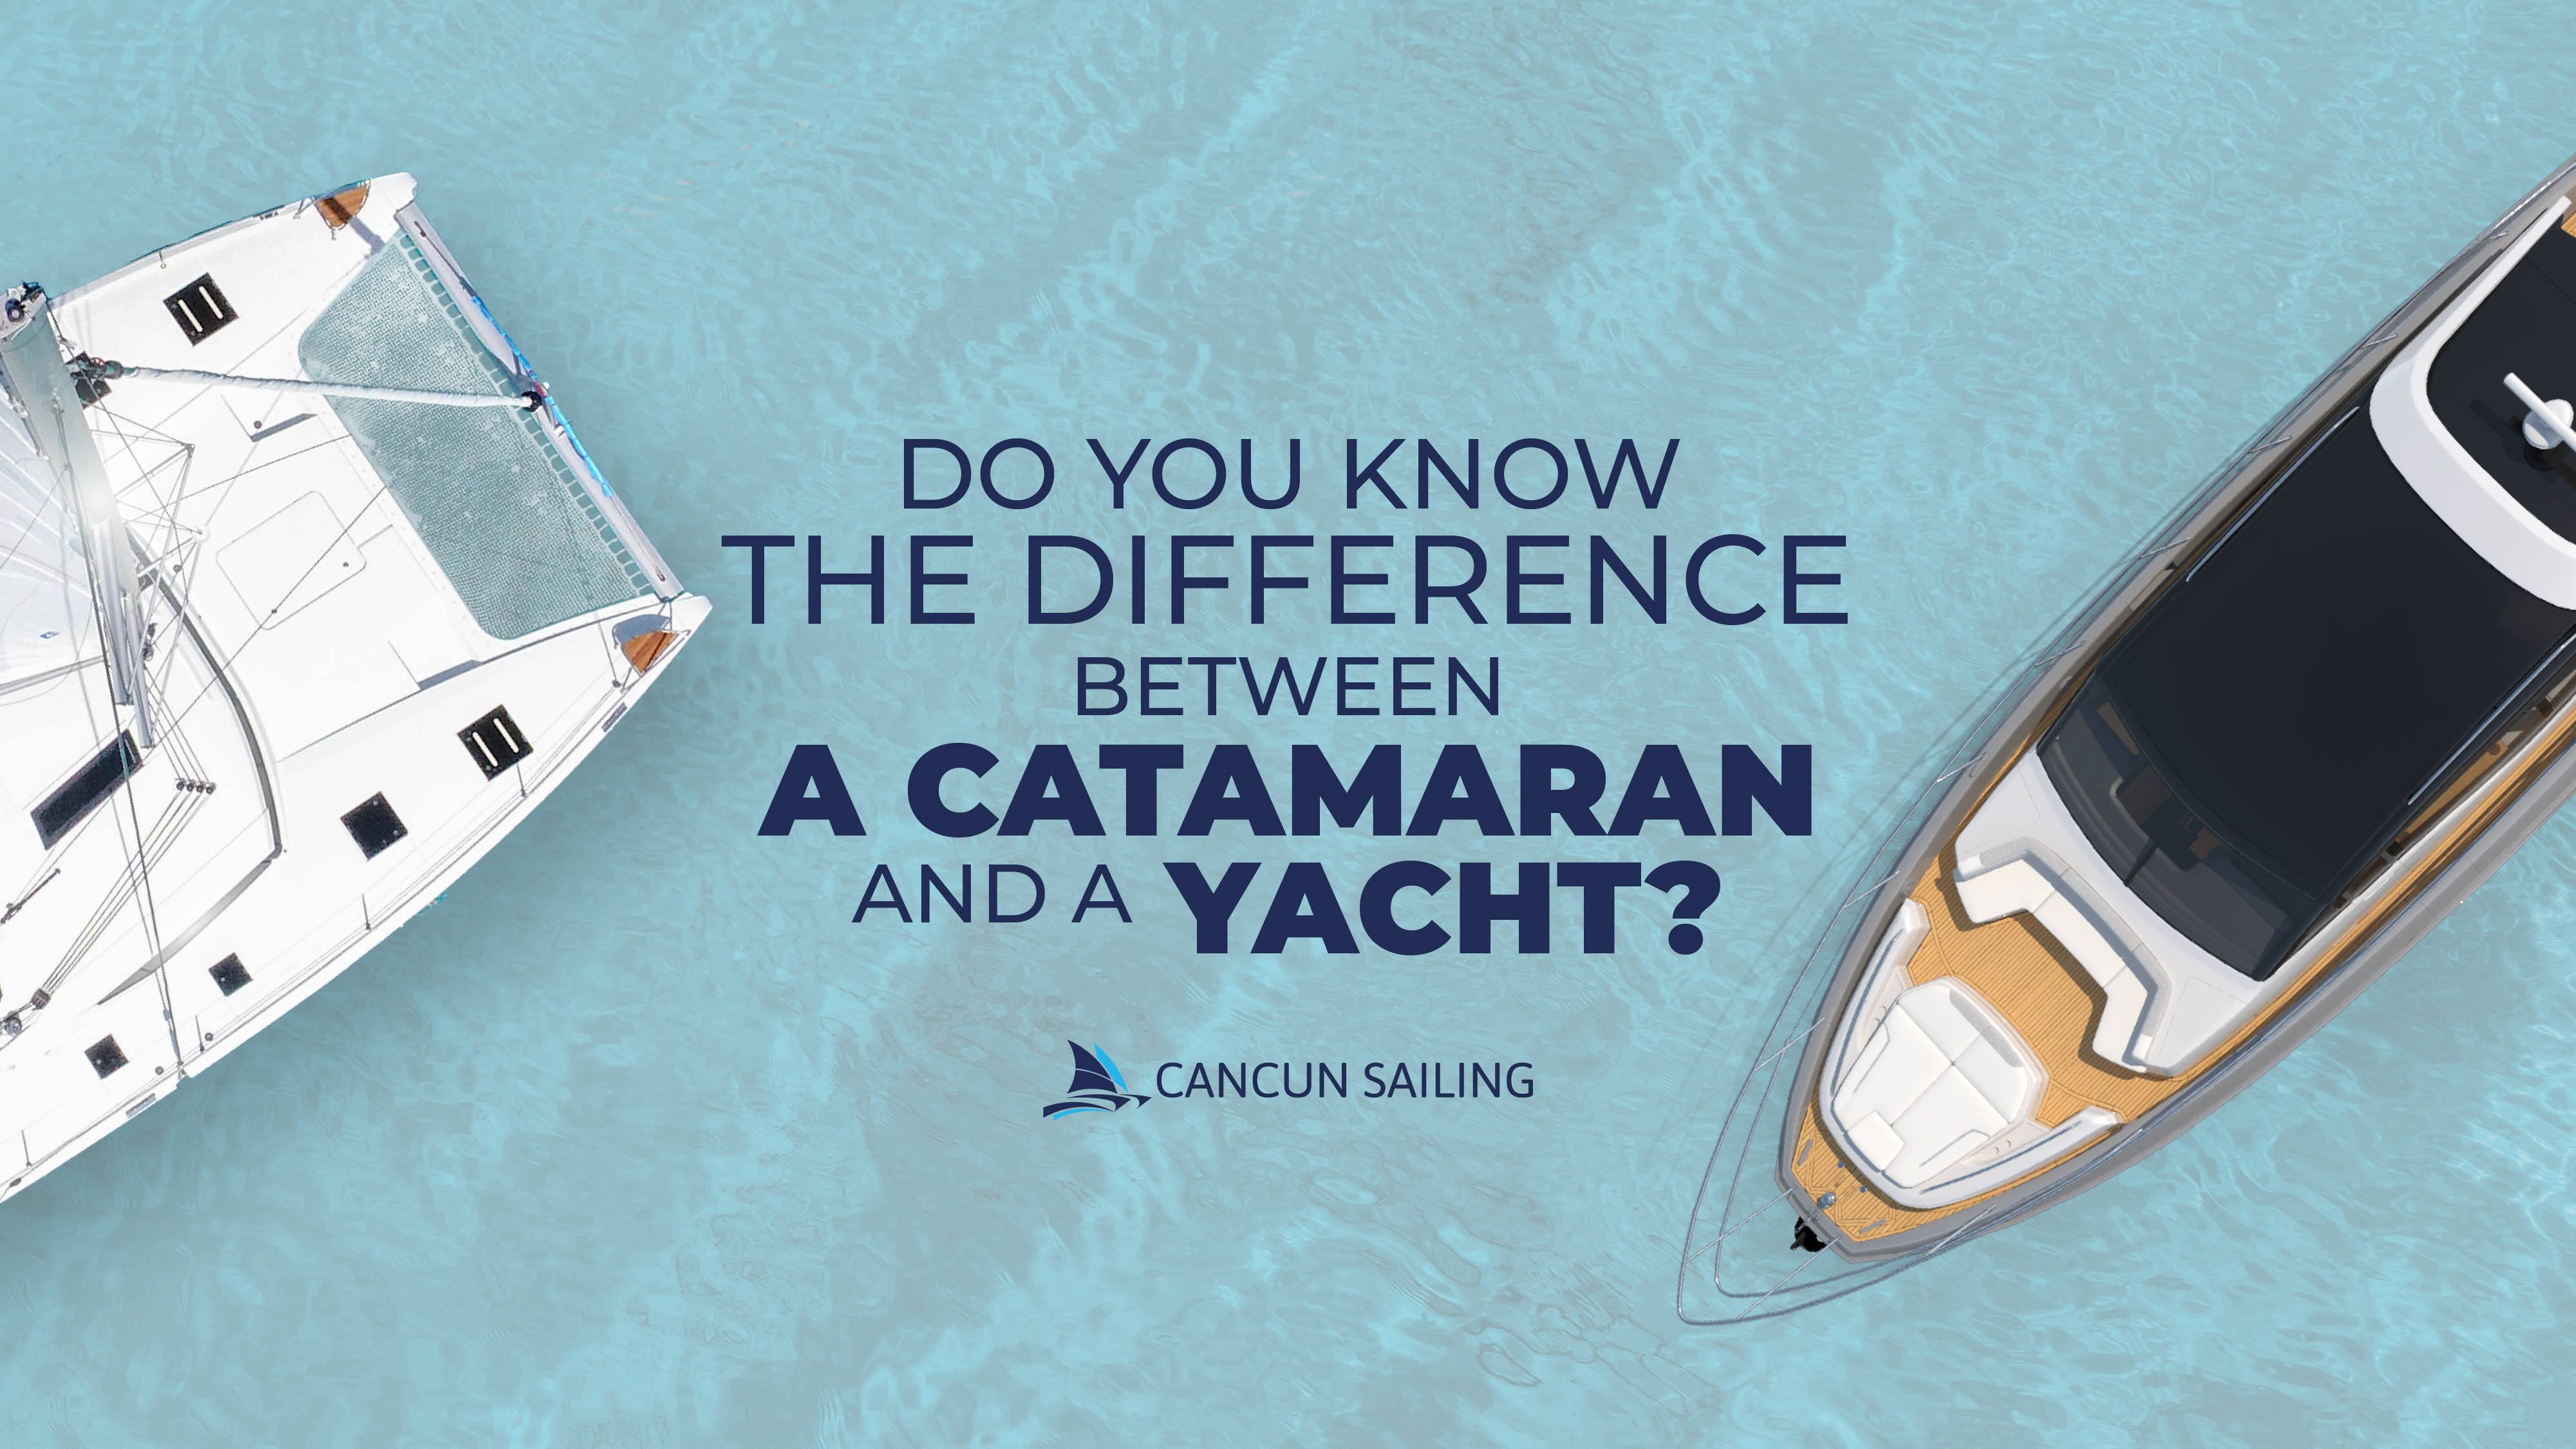 Do You Know The Difference Between A Yacht And A Catamaran?